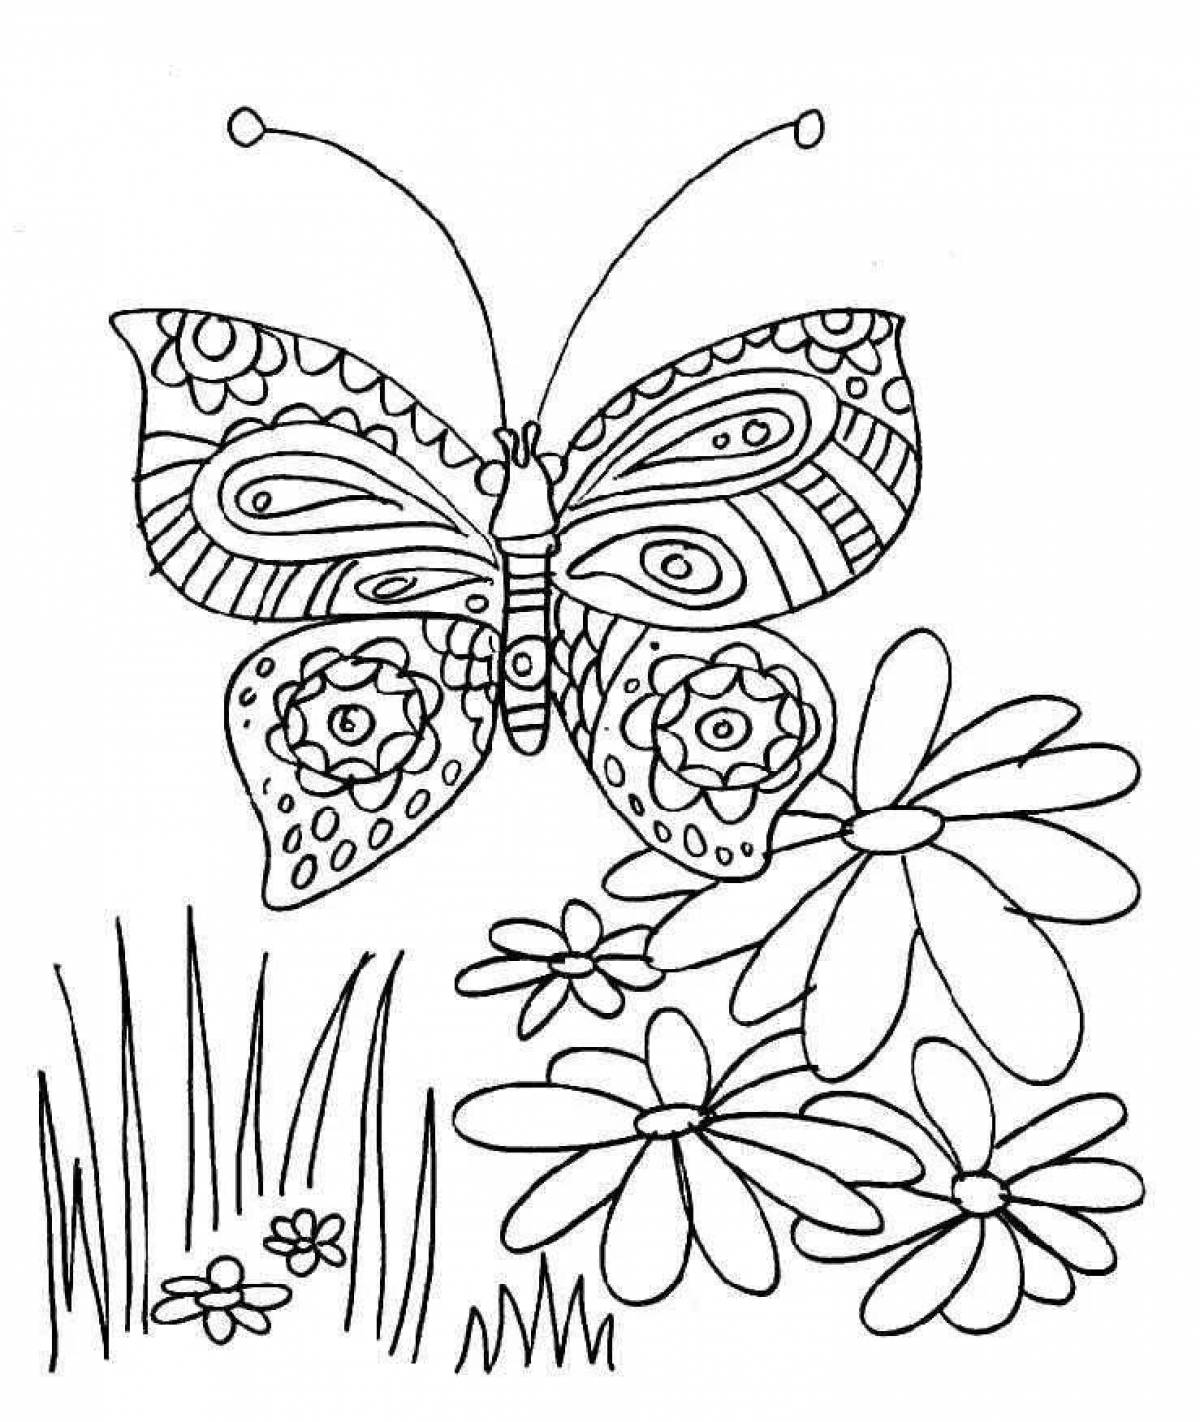 Inspirational flowers and butterflies coloring for girls